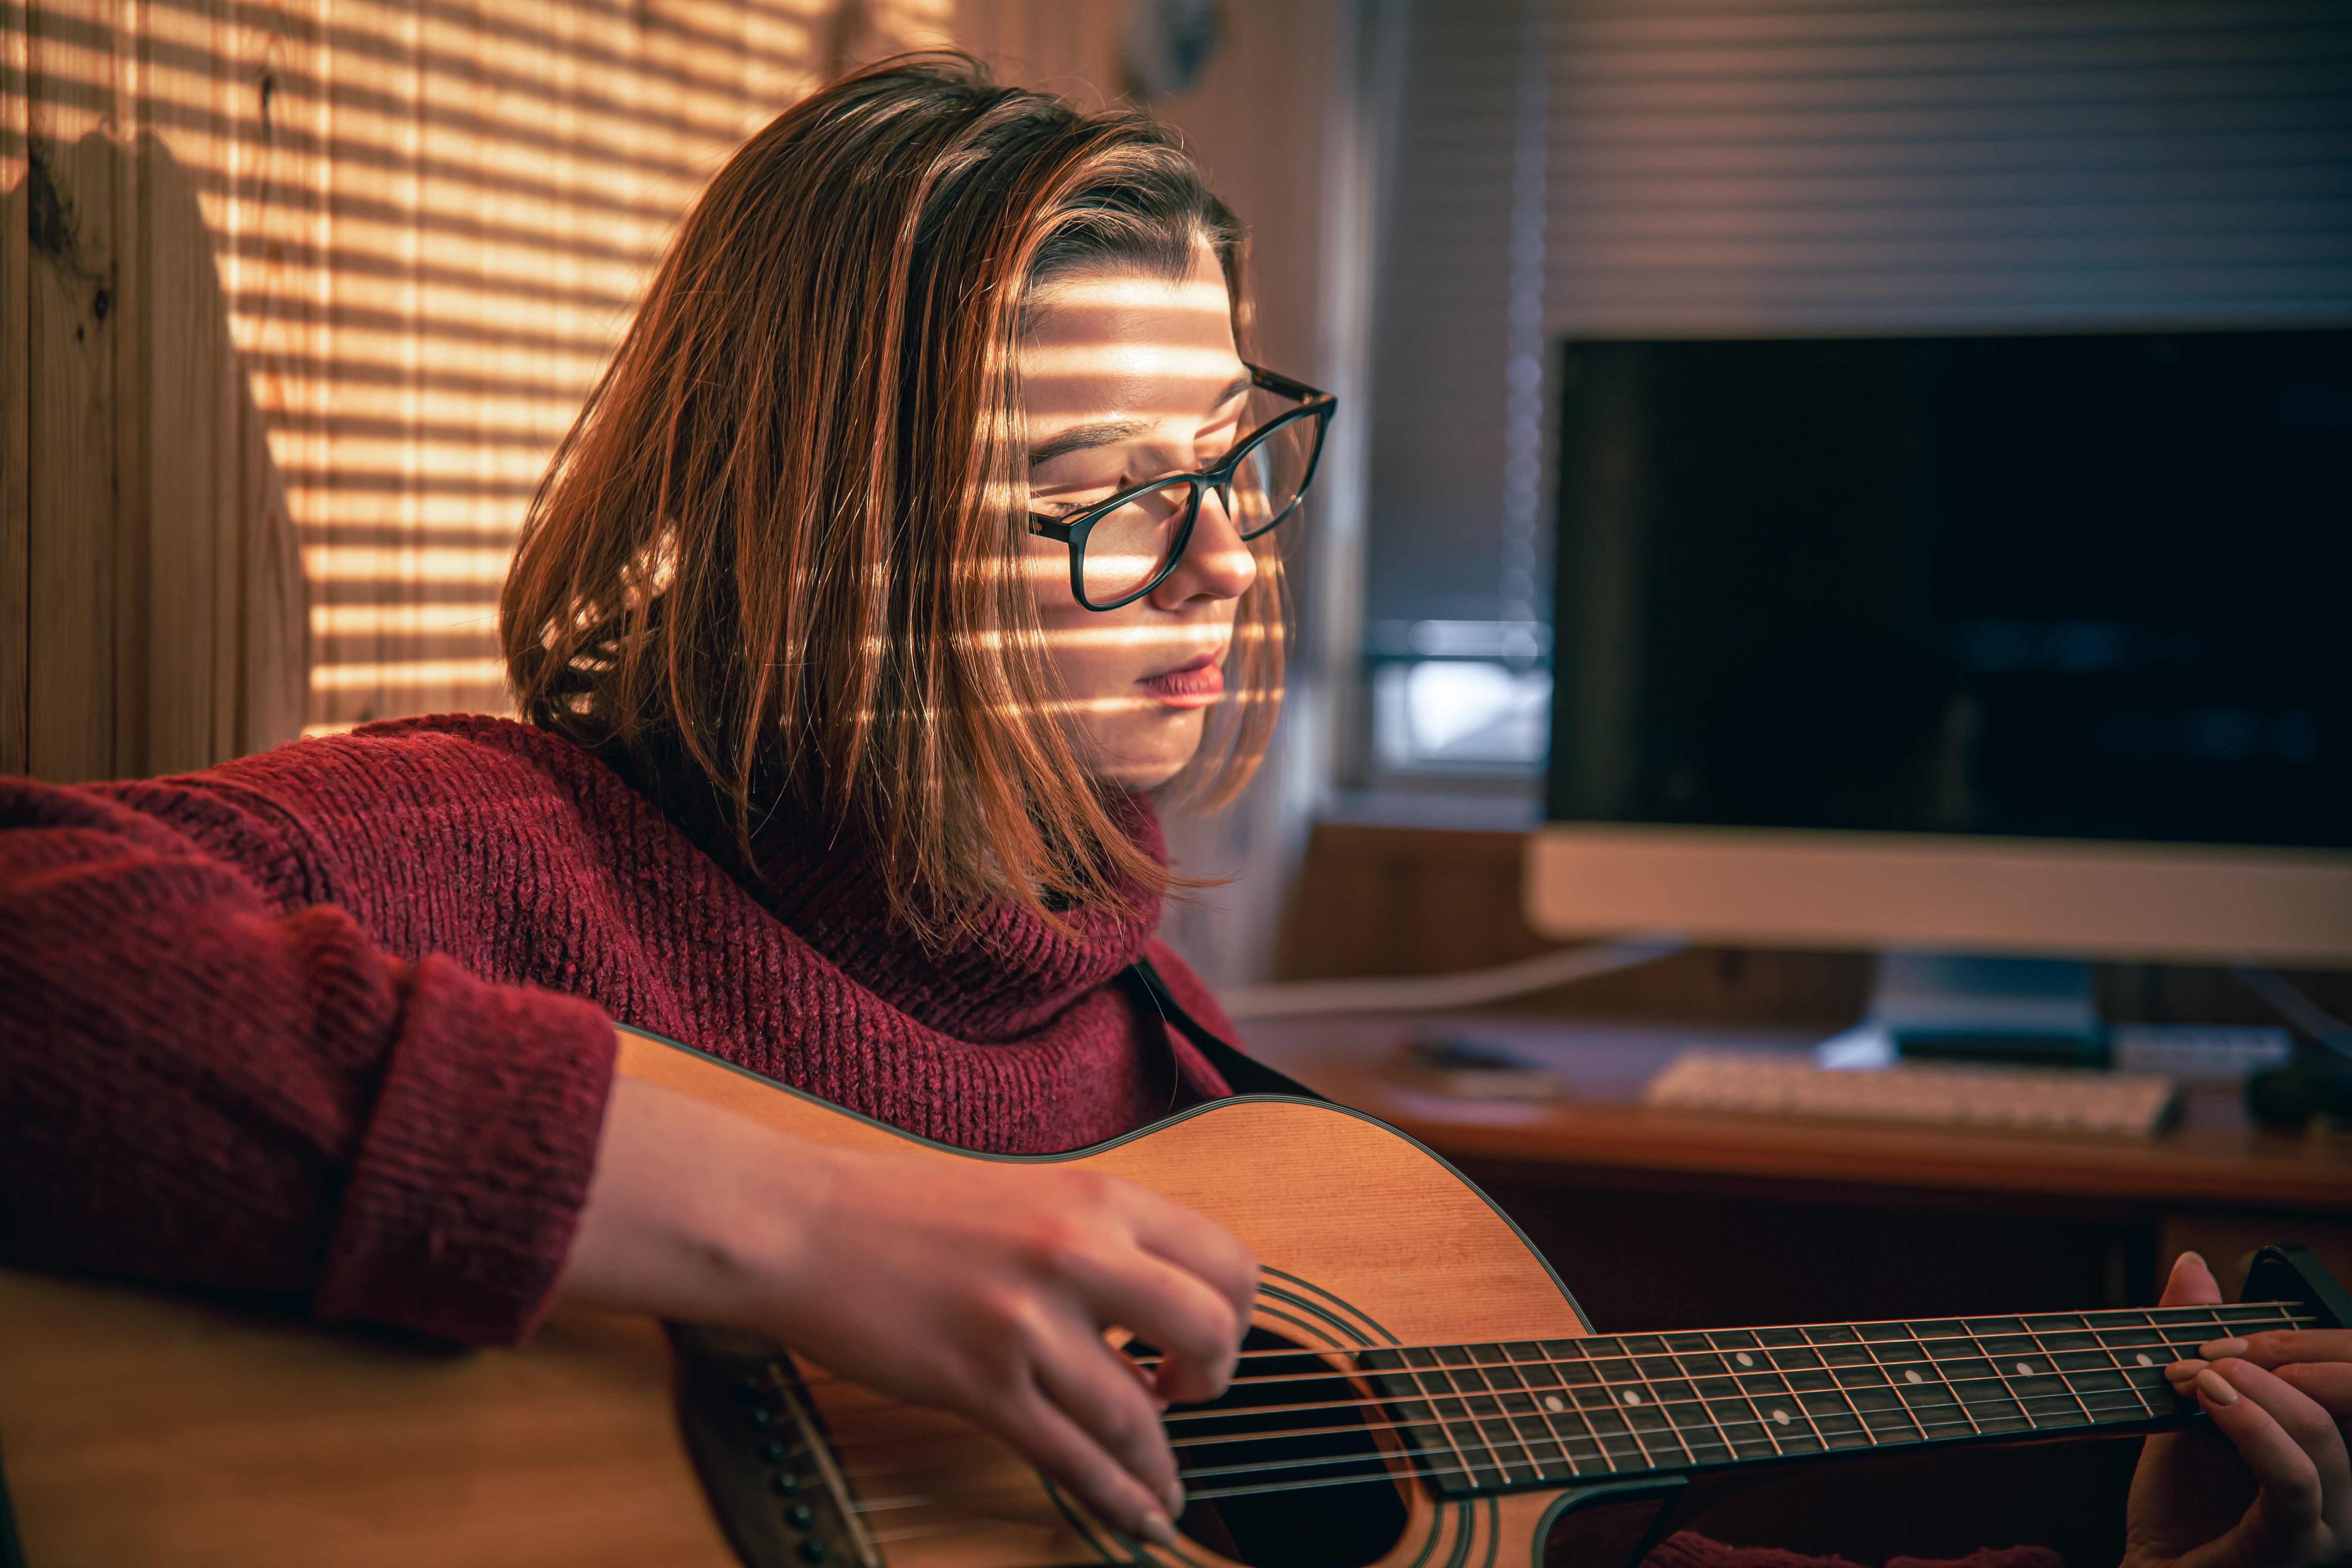 Girl with a guitar in the sunlight through the blinds.